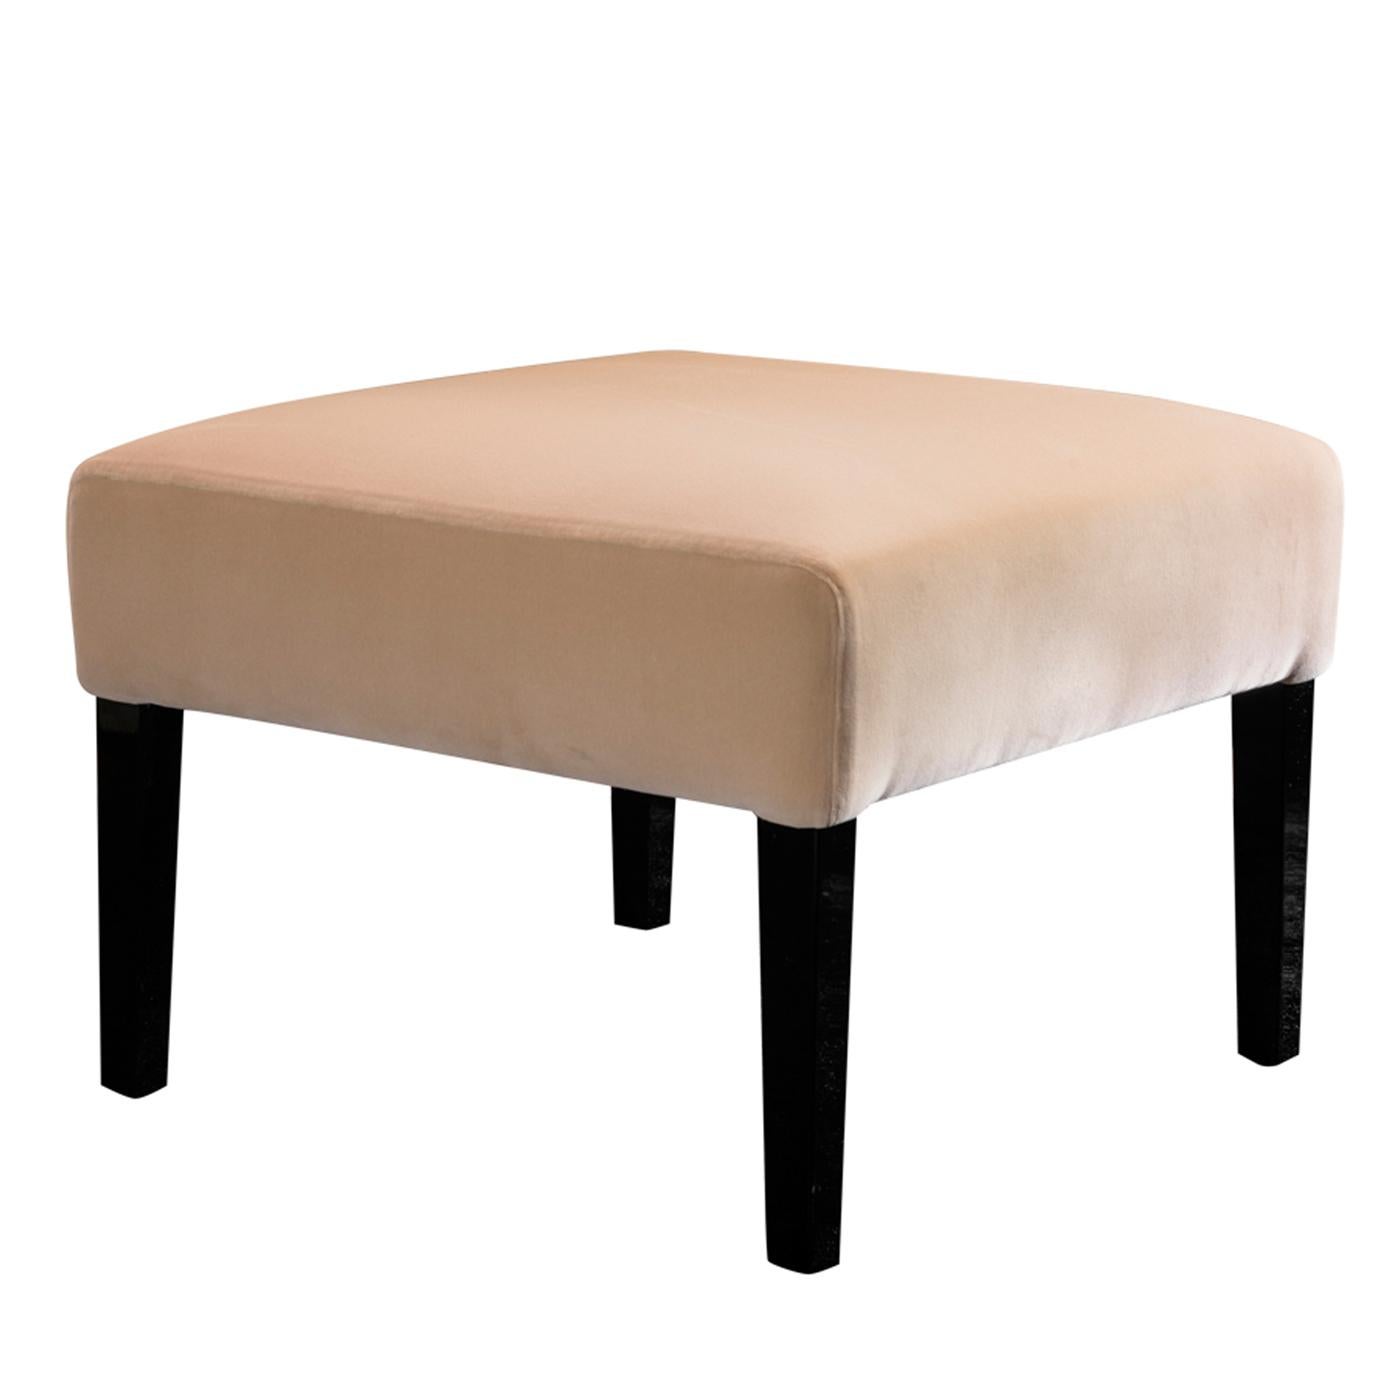 Marked by classical taste and contemporary flair, this pouf makes a discreet yet sophisticated addition to any interior. The simple square silhouette merges the warmth of the wooden legs, finished with matte black lacquer, with soft white fabric